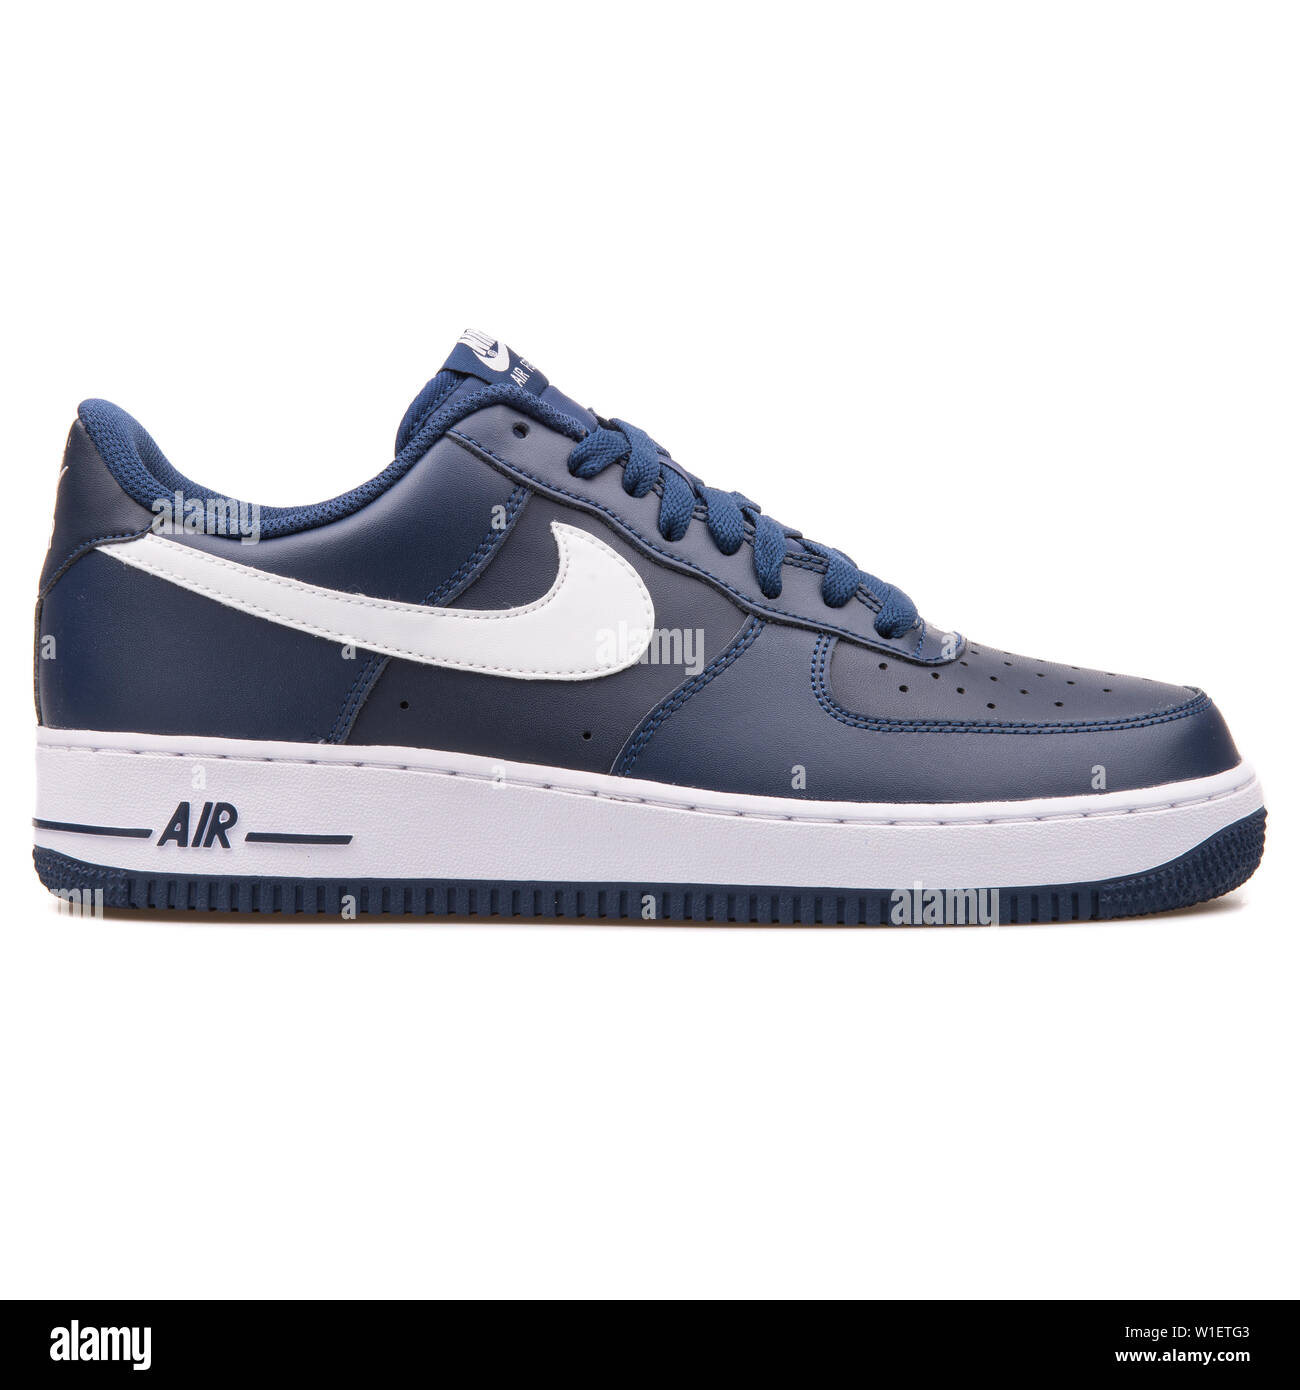 VIENNA, AUSTRIA - AUGUST 10, 2017: Nike Air Force 1 navy blue and white  sneaker on white background Stock Photo - Alamy